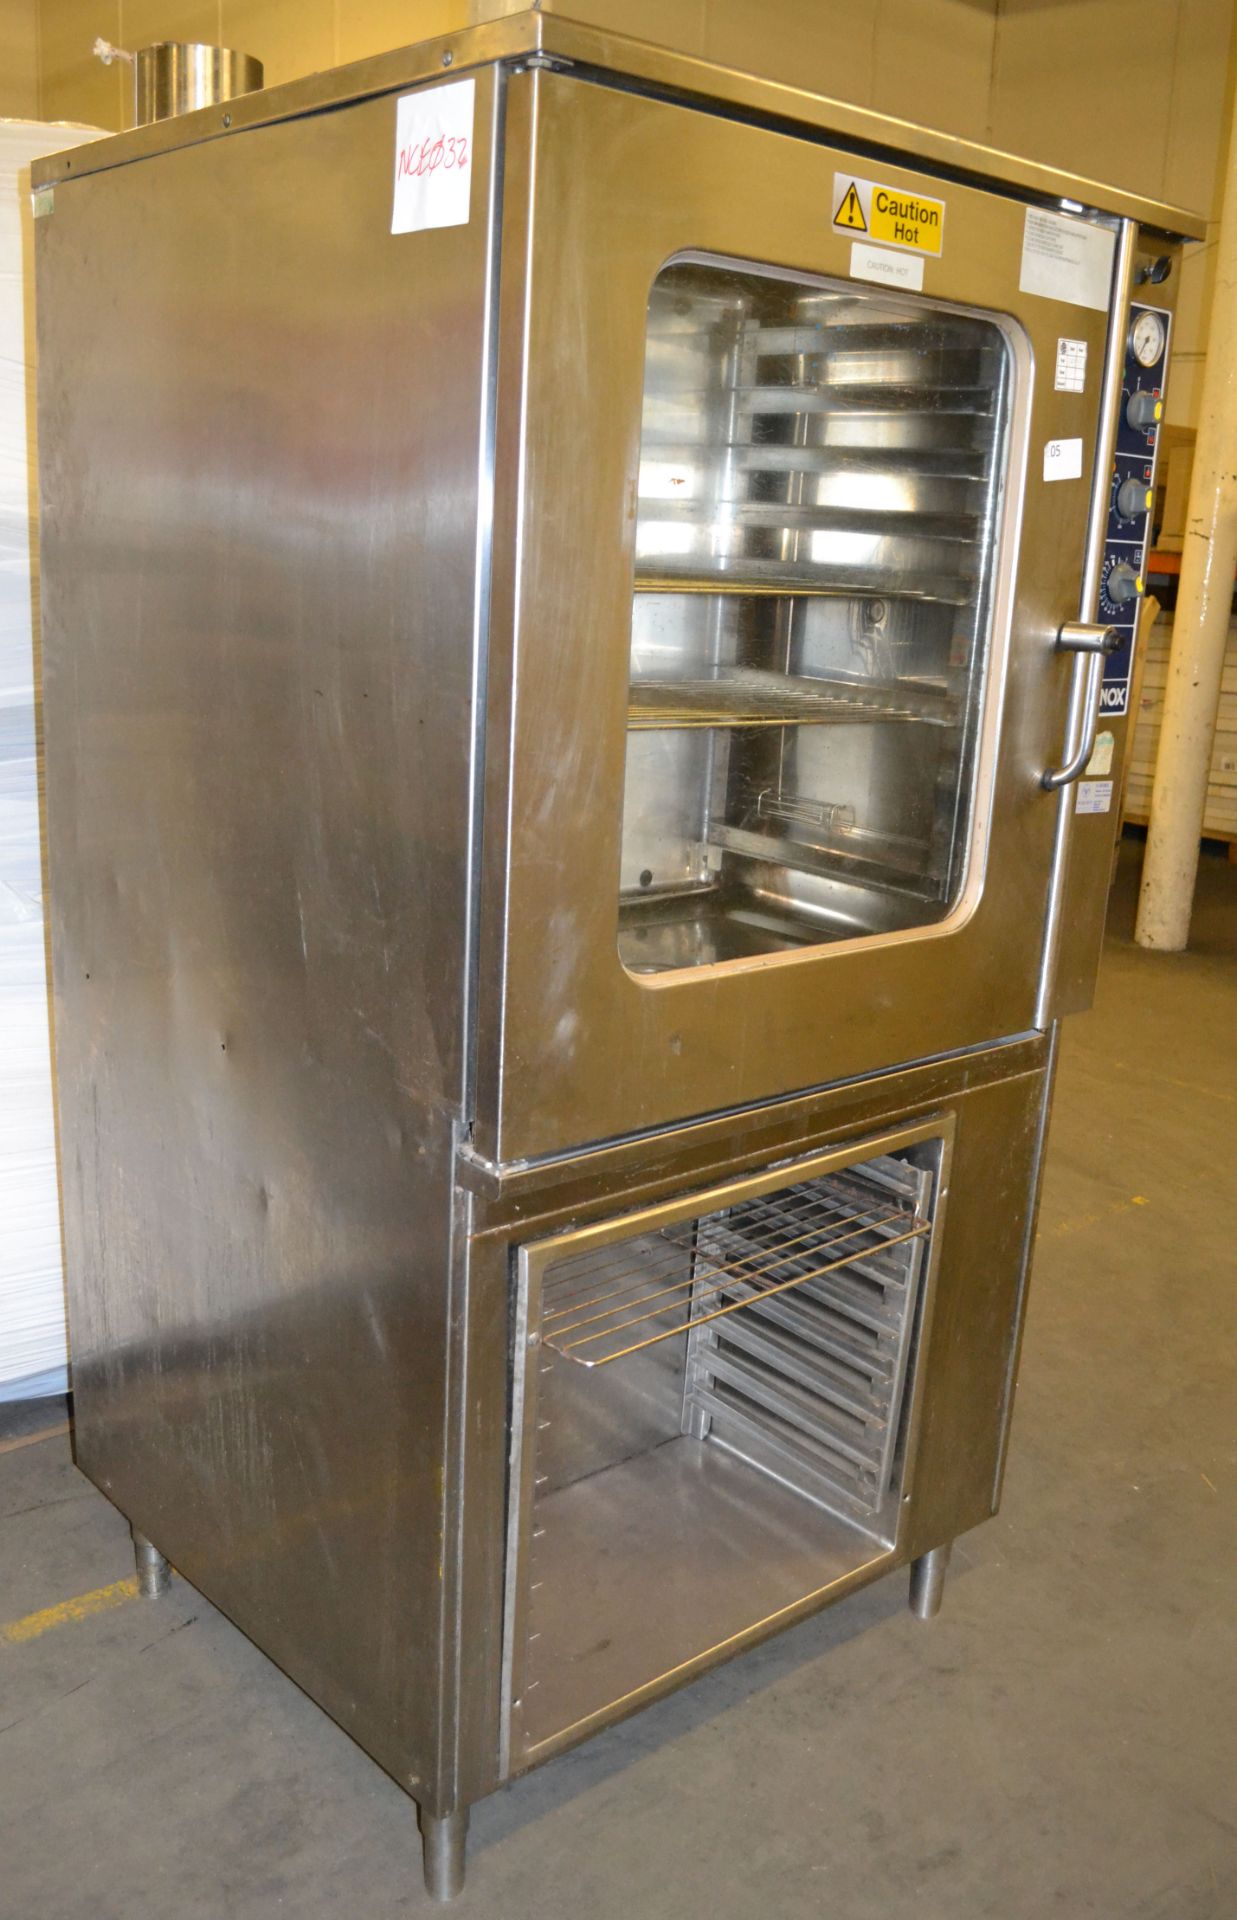 1 x Lainox MG110M LX Type Combination Oven with Pan Capacity - Ref:NCE032 - CL007 - Location: Bolton - Image 4 of 15